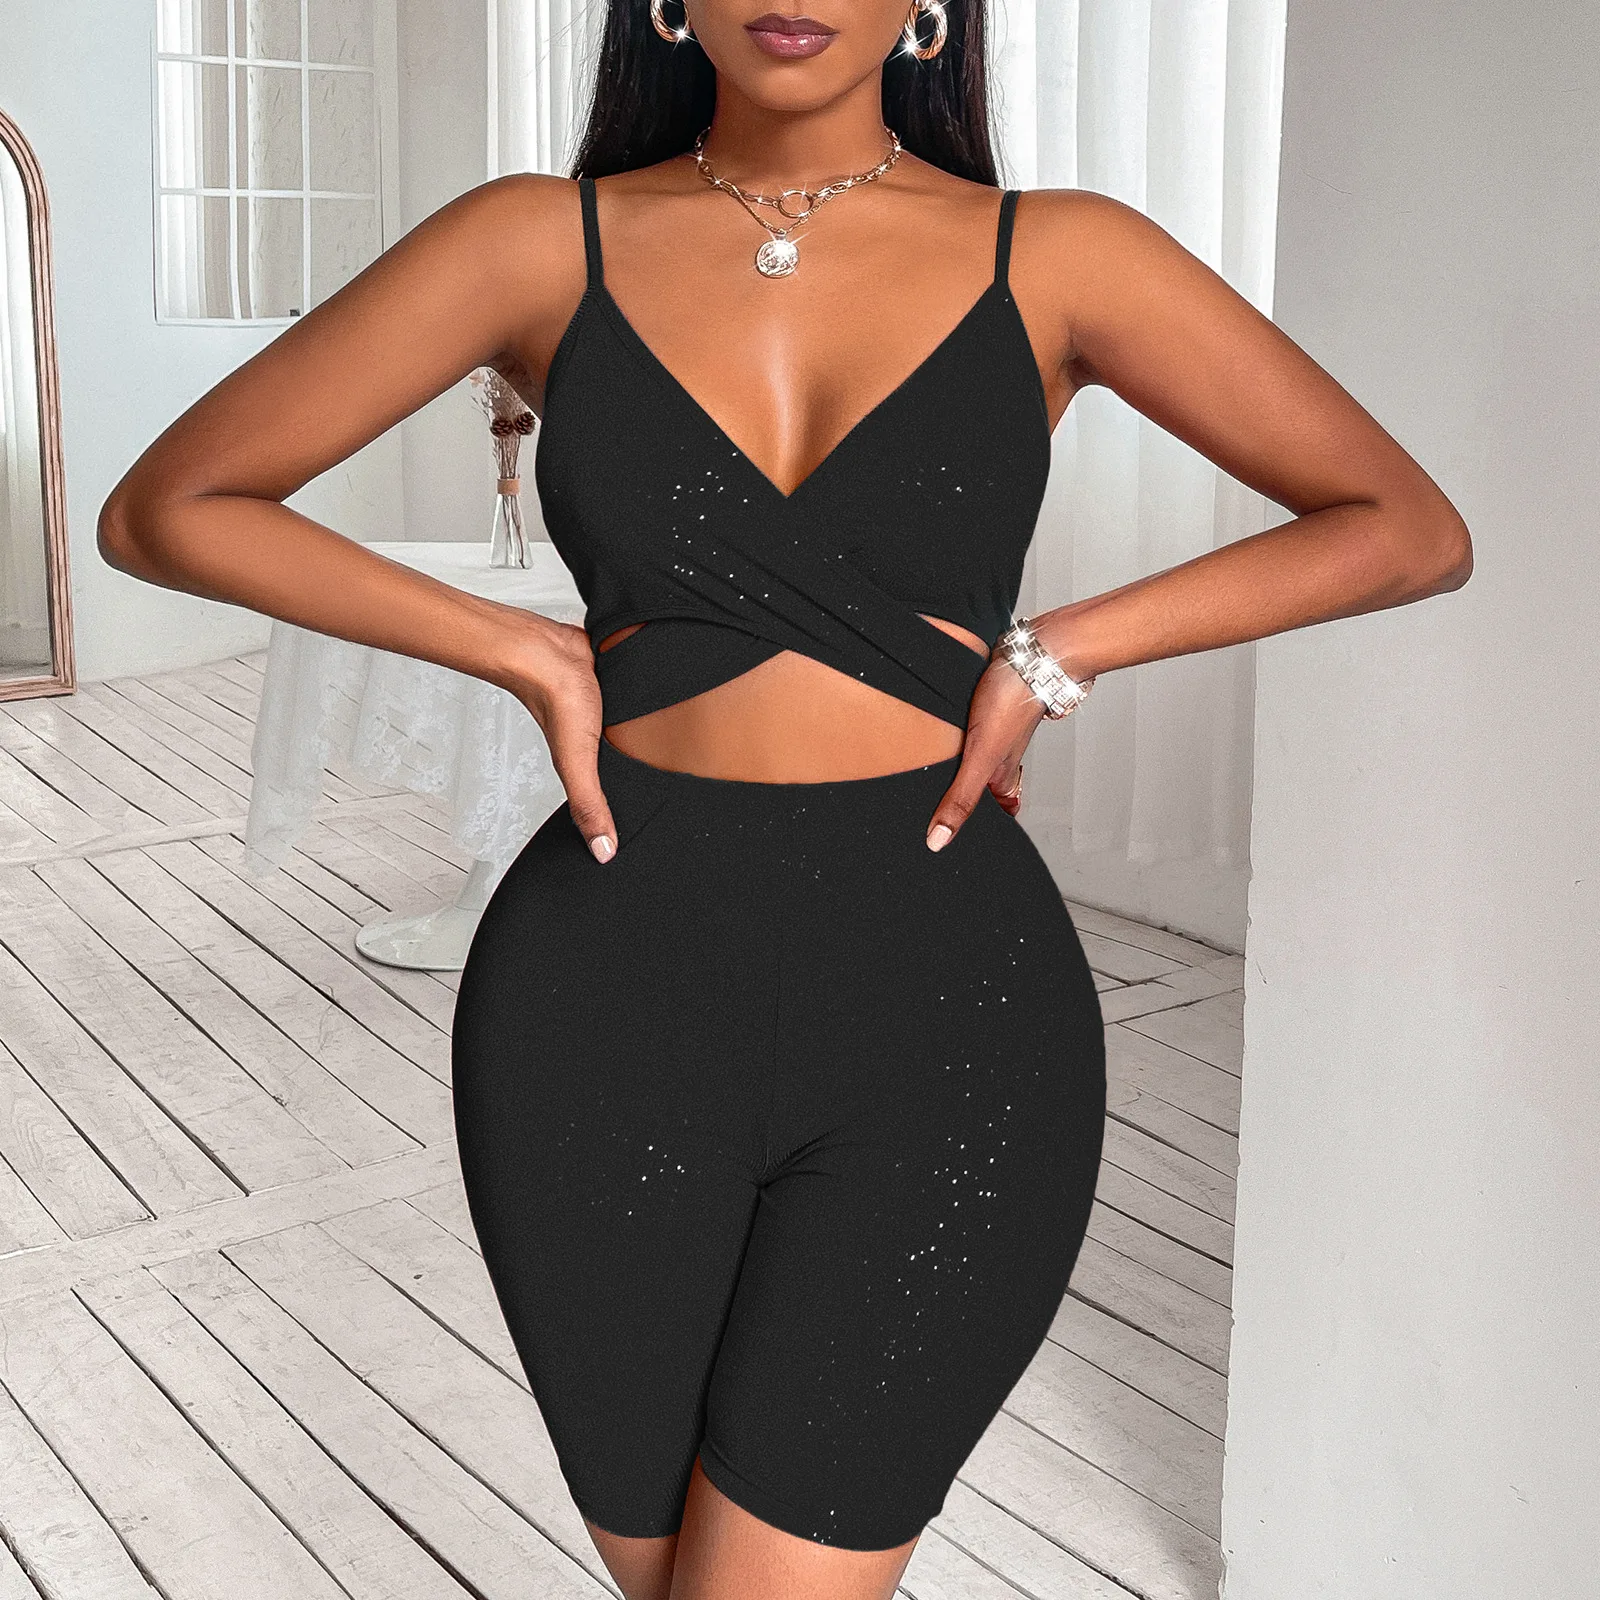 Spaghetti Straps Skinny Rompers Fitness Solid Bandage Hollow Out Playsuits 2022 Summer Sexy Night Club Party One Piece Overalls 3d body print women sexy jumpsuits with sleeve covers hollow out lace up spaghetti straps slim skinny rompers club party romper